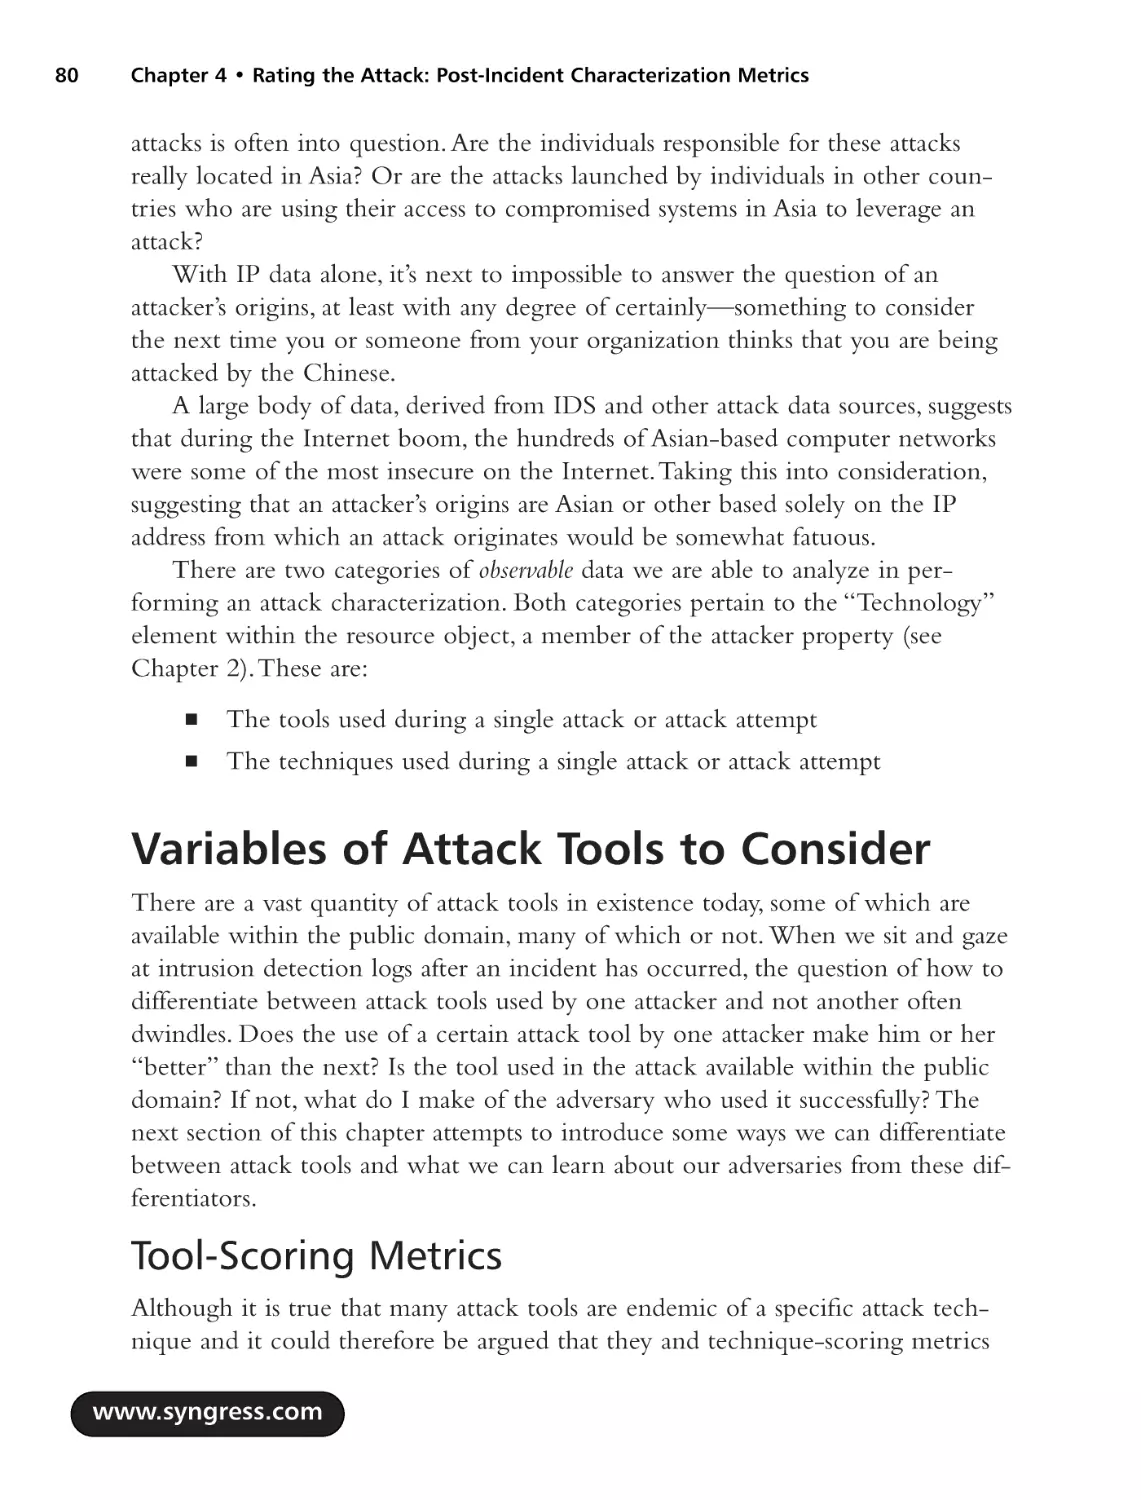 Variables of Attack Tools to Consider
Tool-Scoring Metrics